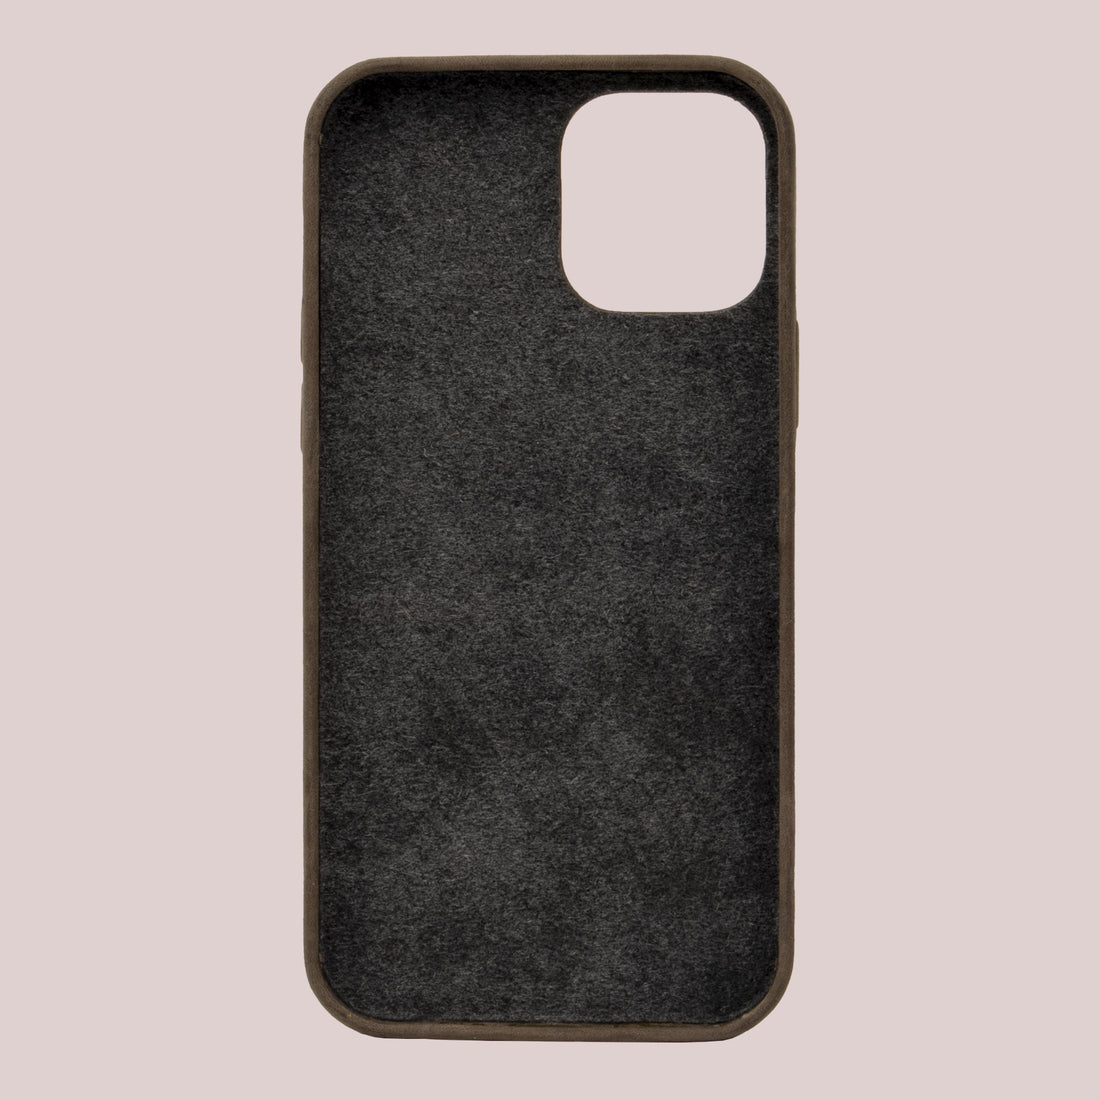 Kalon Case for iPhone 14 with MagSafe Compatibility - Dark Soil